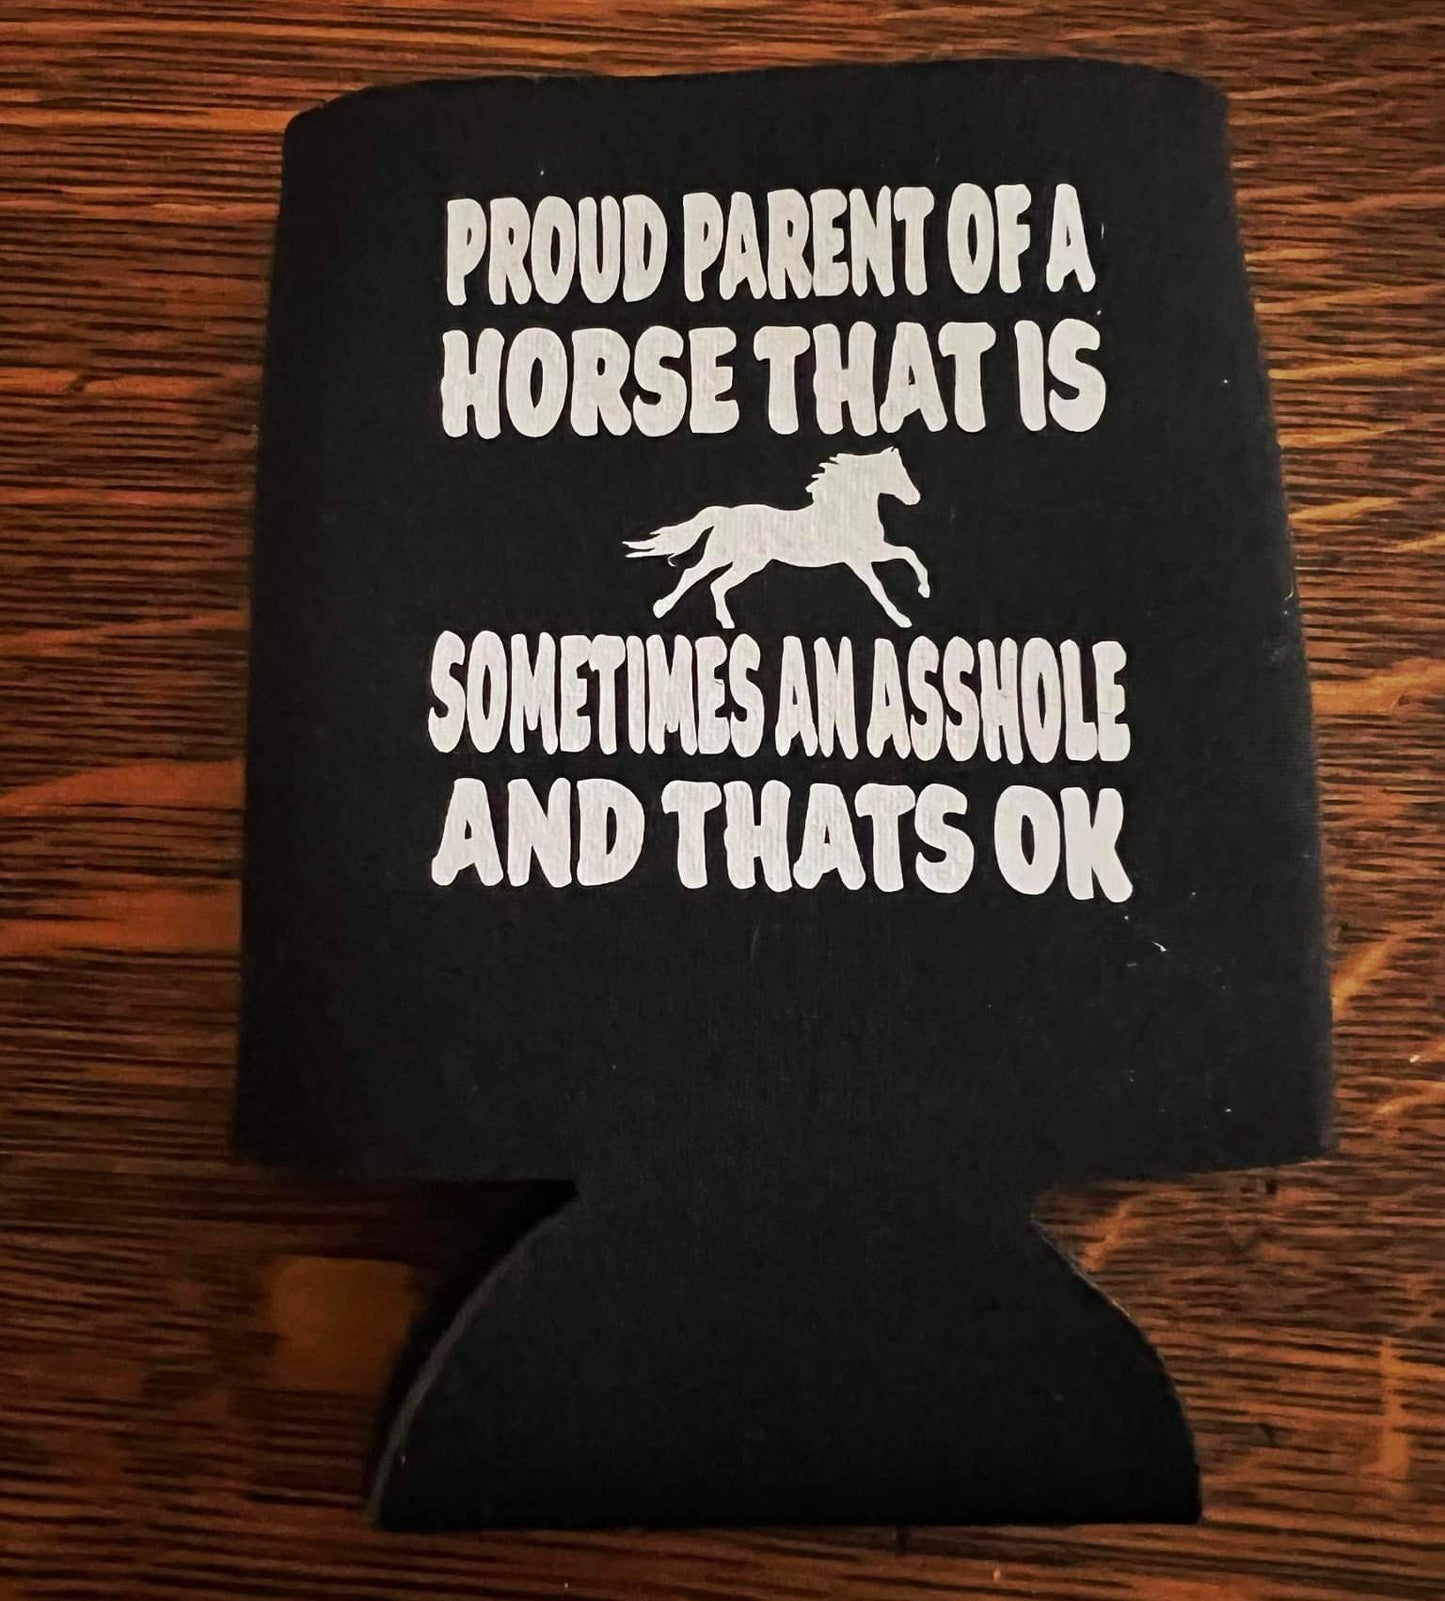 "Proud Parent of a Horse" Etched Glass Mug